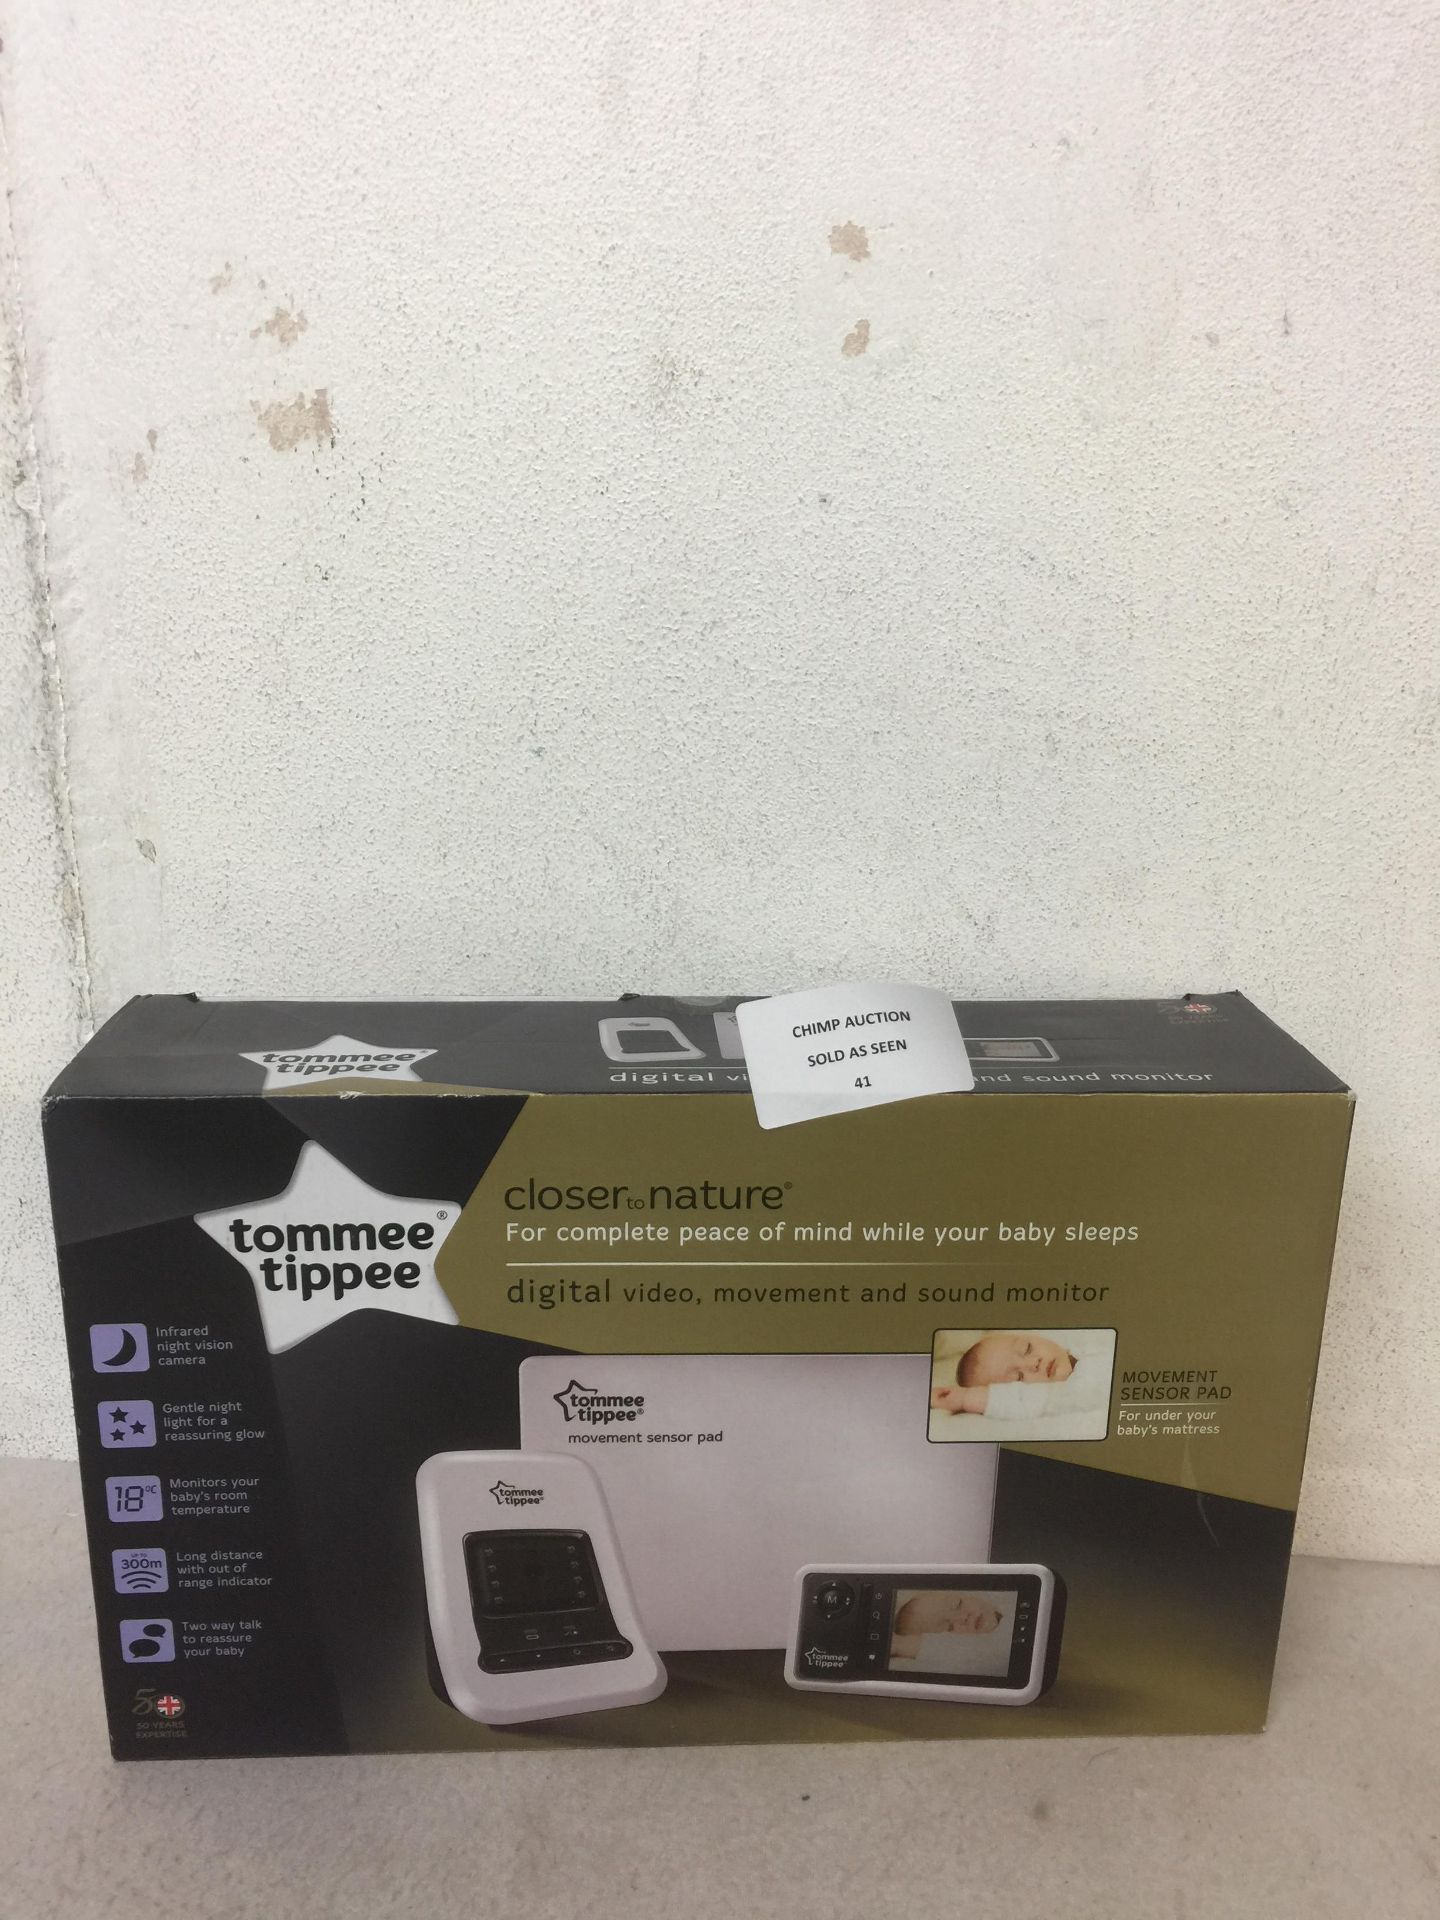 Tommee Tippee Closer to Nature Video Sensor Monitor RRP £199.99.